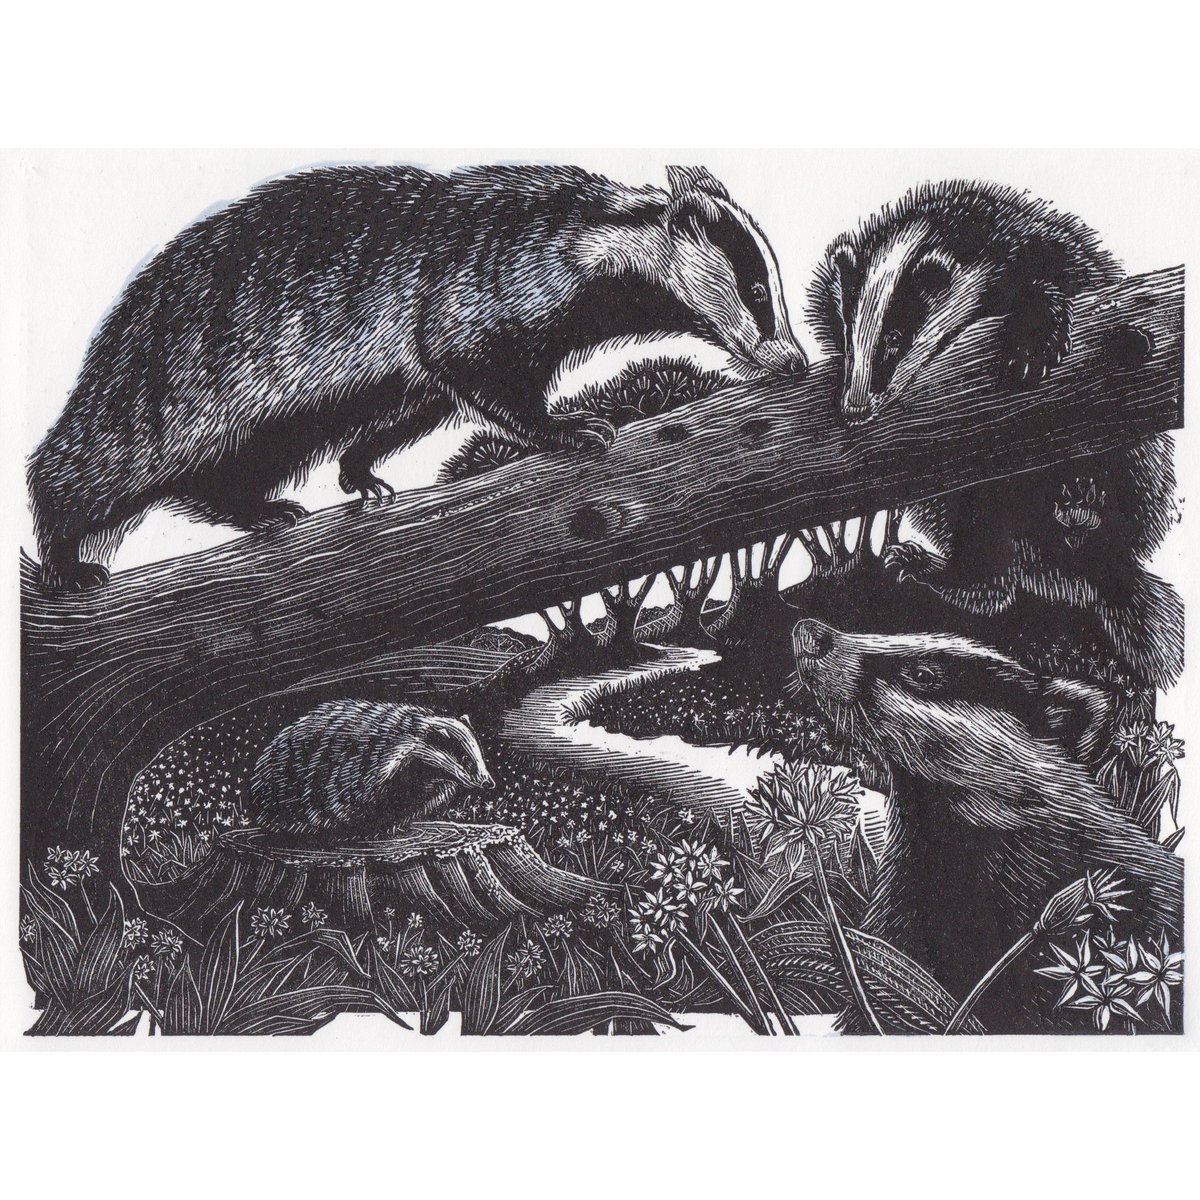 Julie Orpen - A Cete of Badgers- from the 86th SWE Annual Exhibition, on at Bankside Gallery, London until 25th February. The exhibition will tour all year. Engravings also available from our website. societyofwoodengravers.co.uk #printmaking #woodengraving